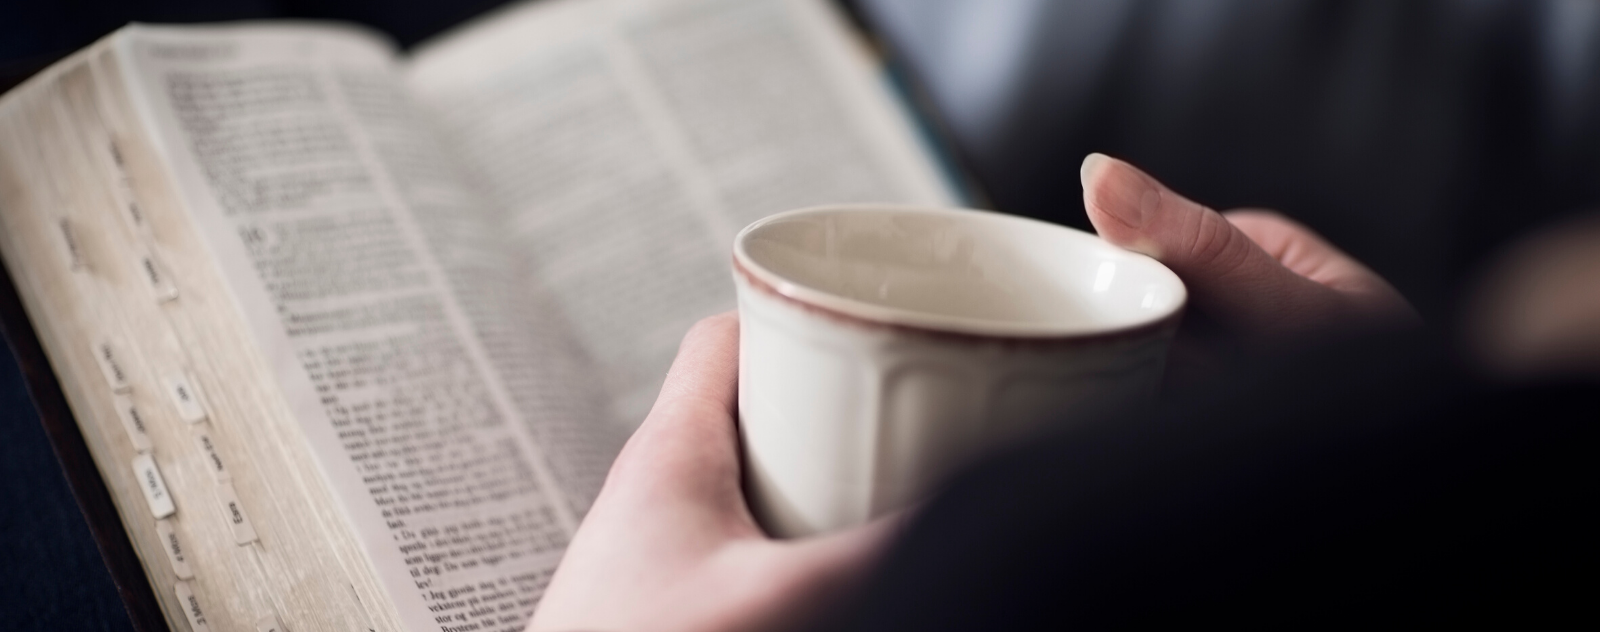 The Gospel of matthew for a Bible Study